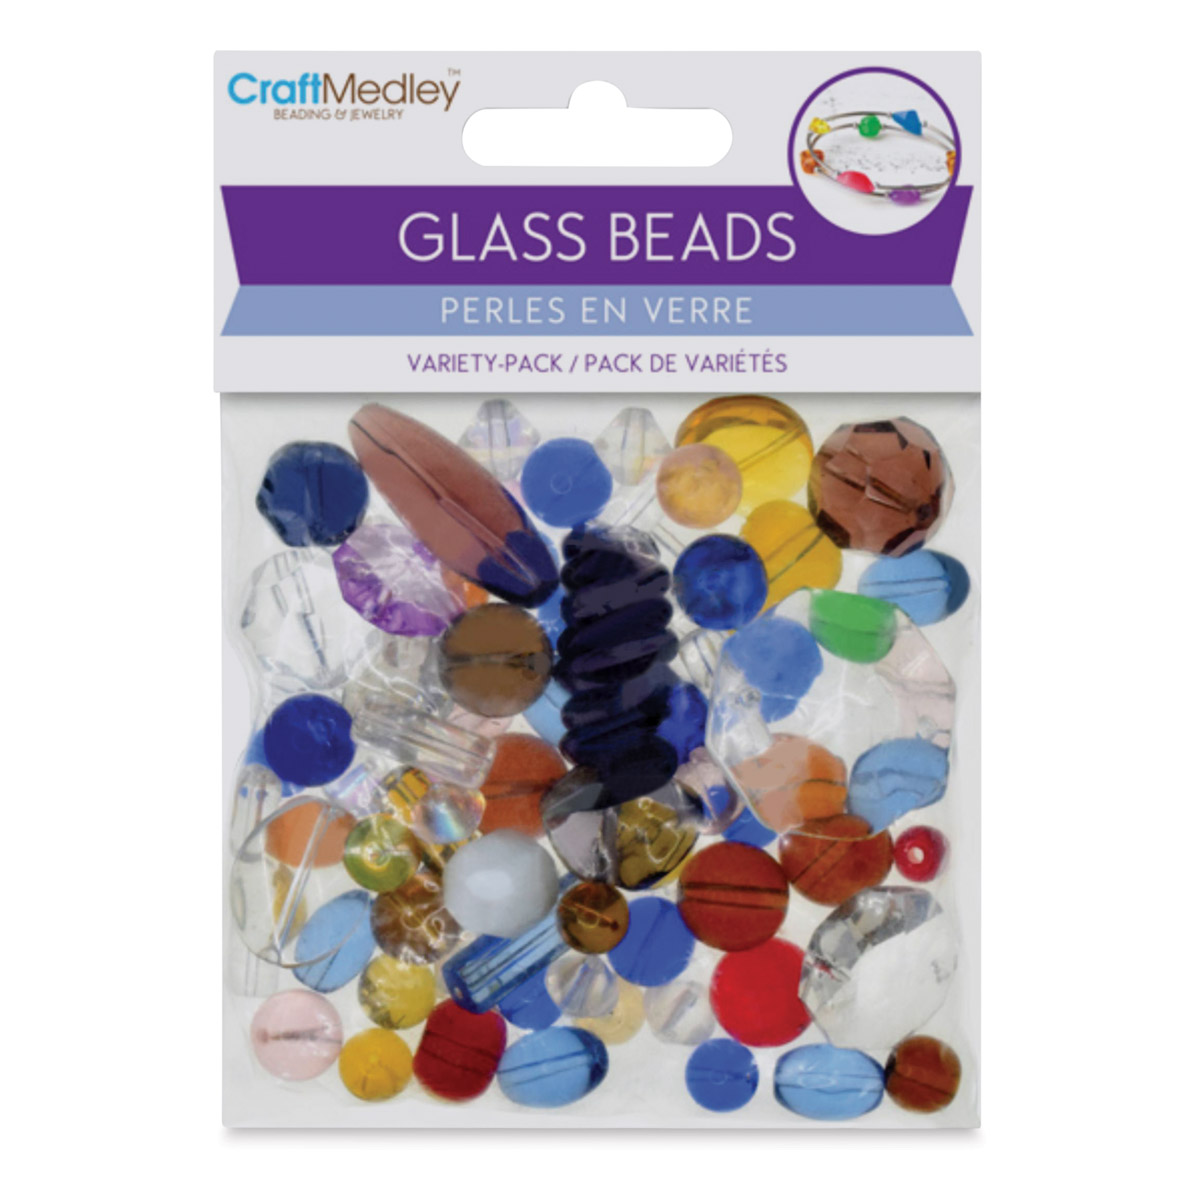 Craft Medley Pearl Glass Beads